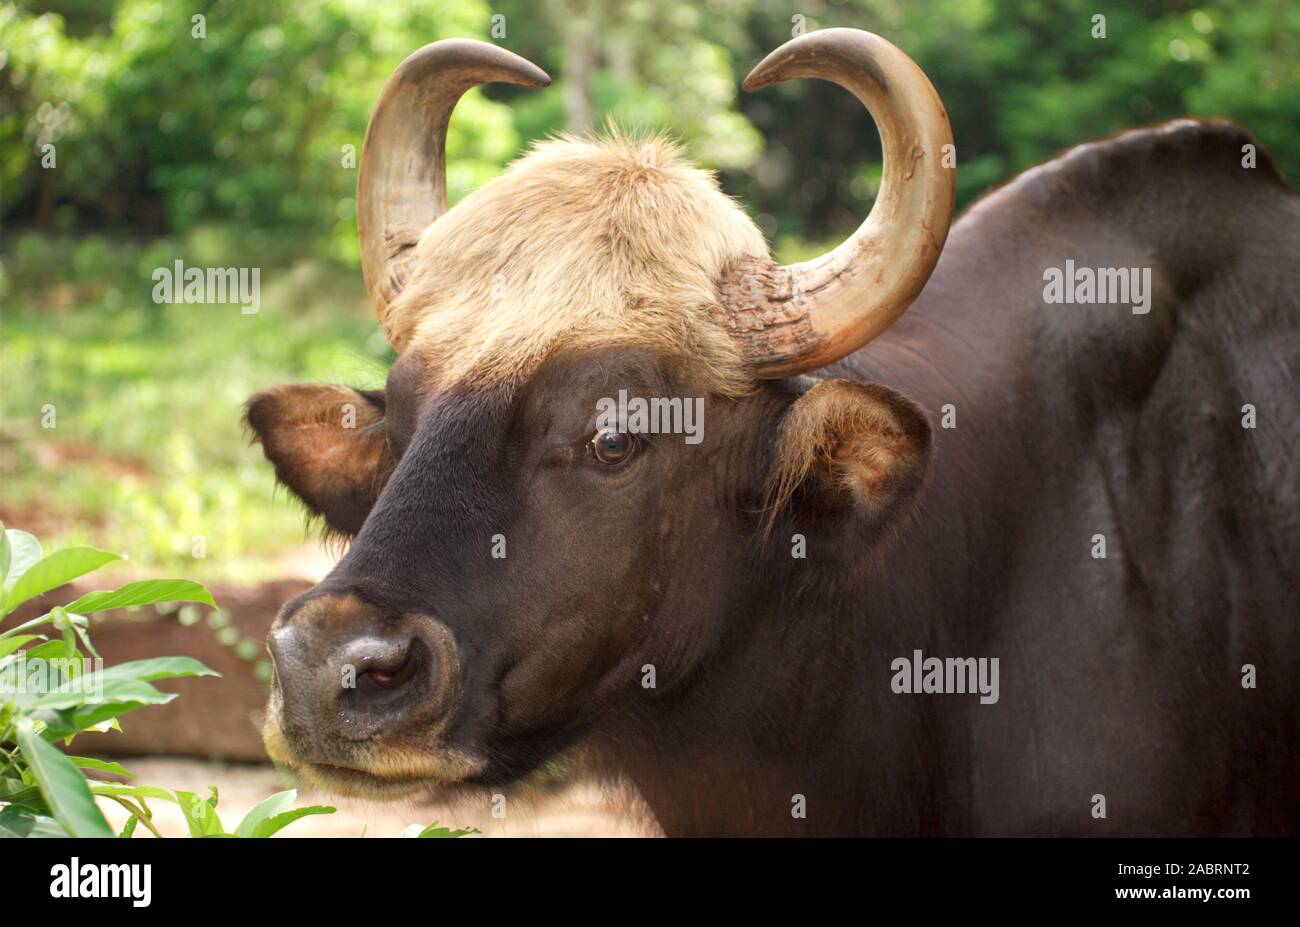 GAUR CATTLE, head detail (Bos gaurus). Largest species of wild cattle. Portrait, showing head with upward turning symmetrical, shaped horns. Ruminant Stock Photo